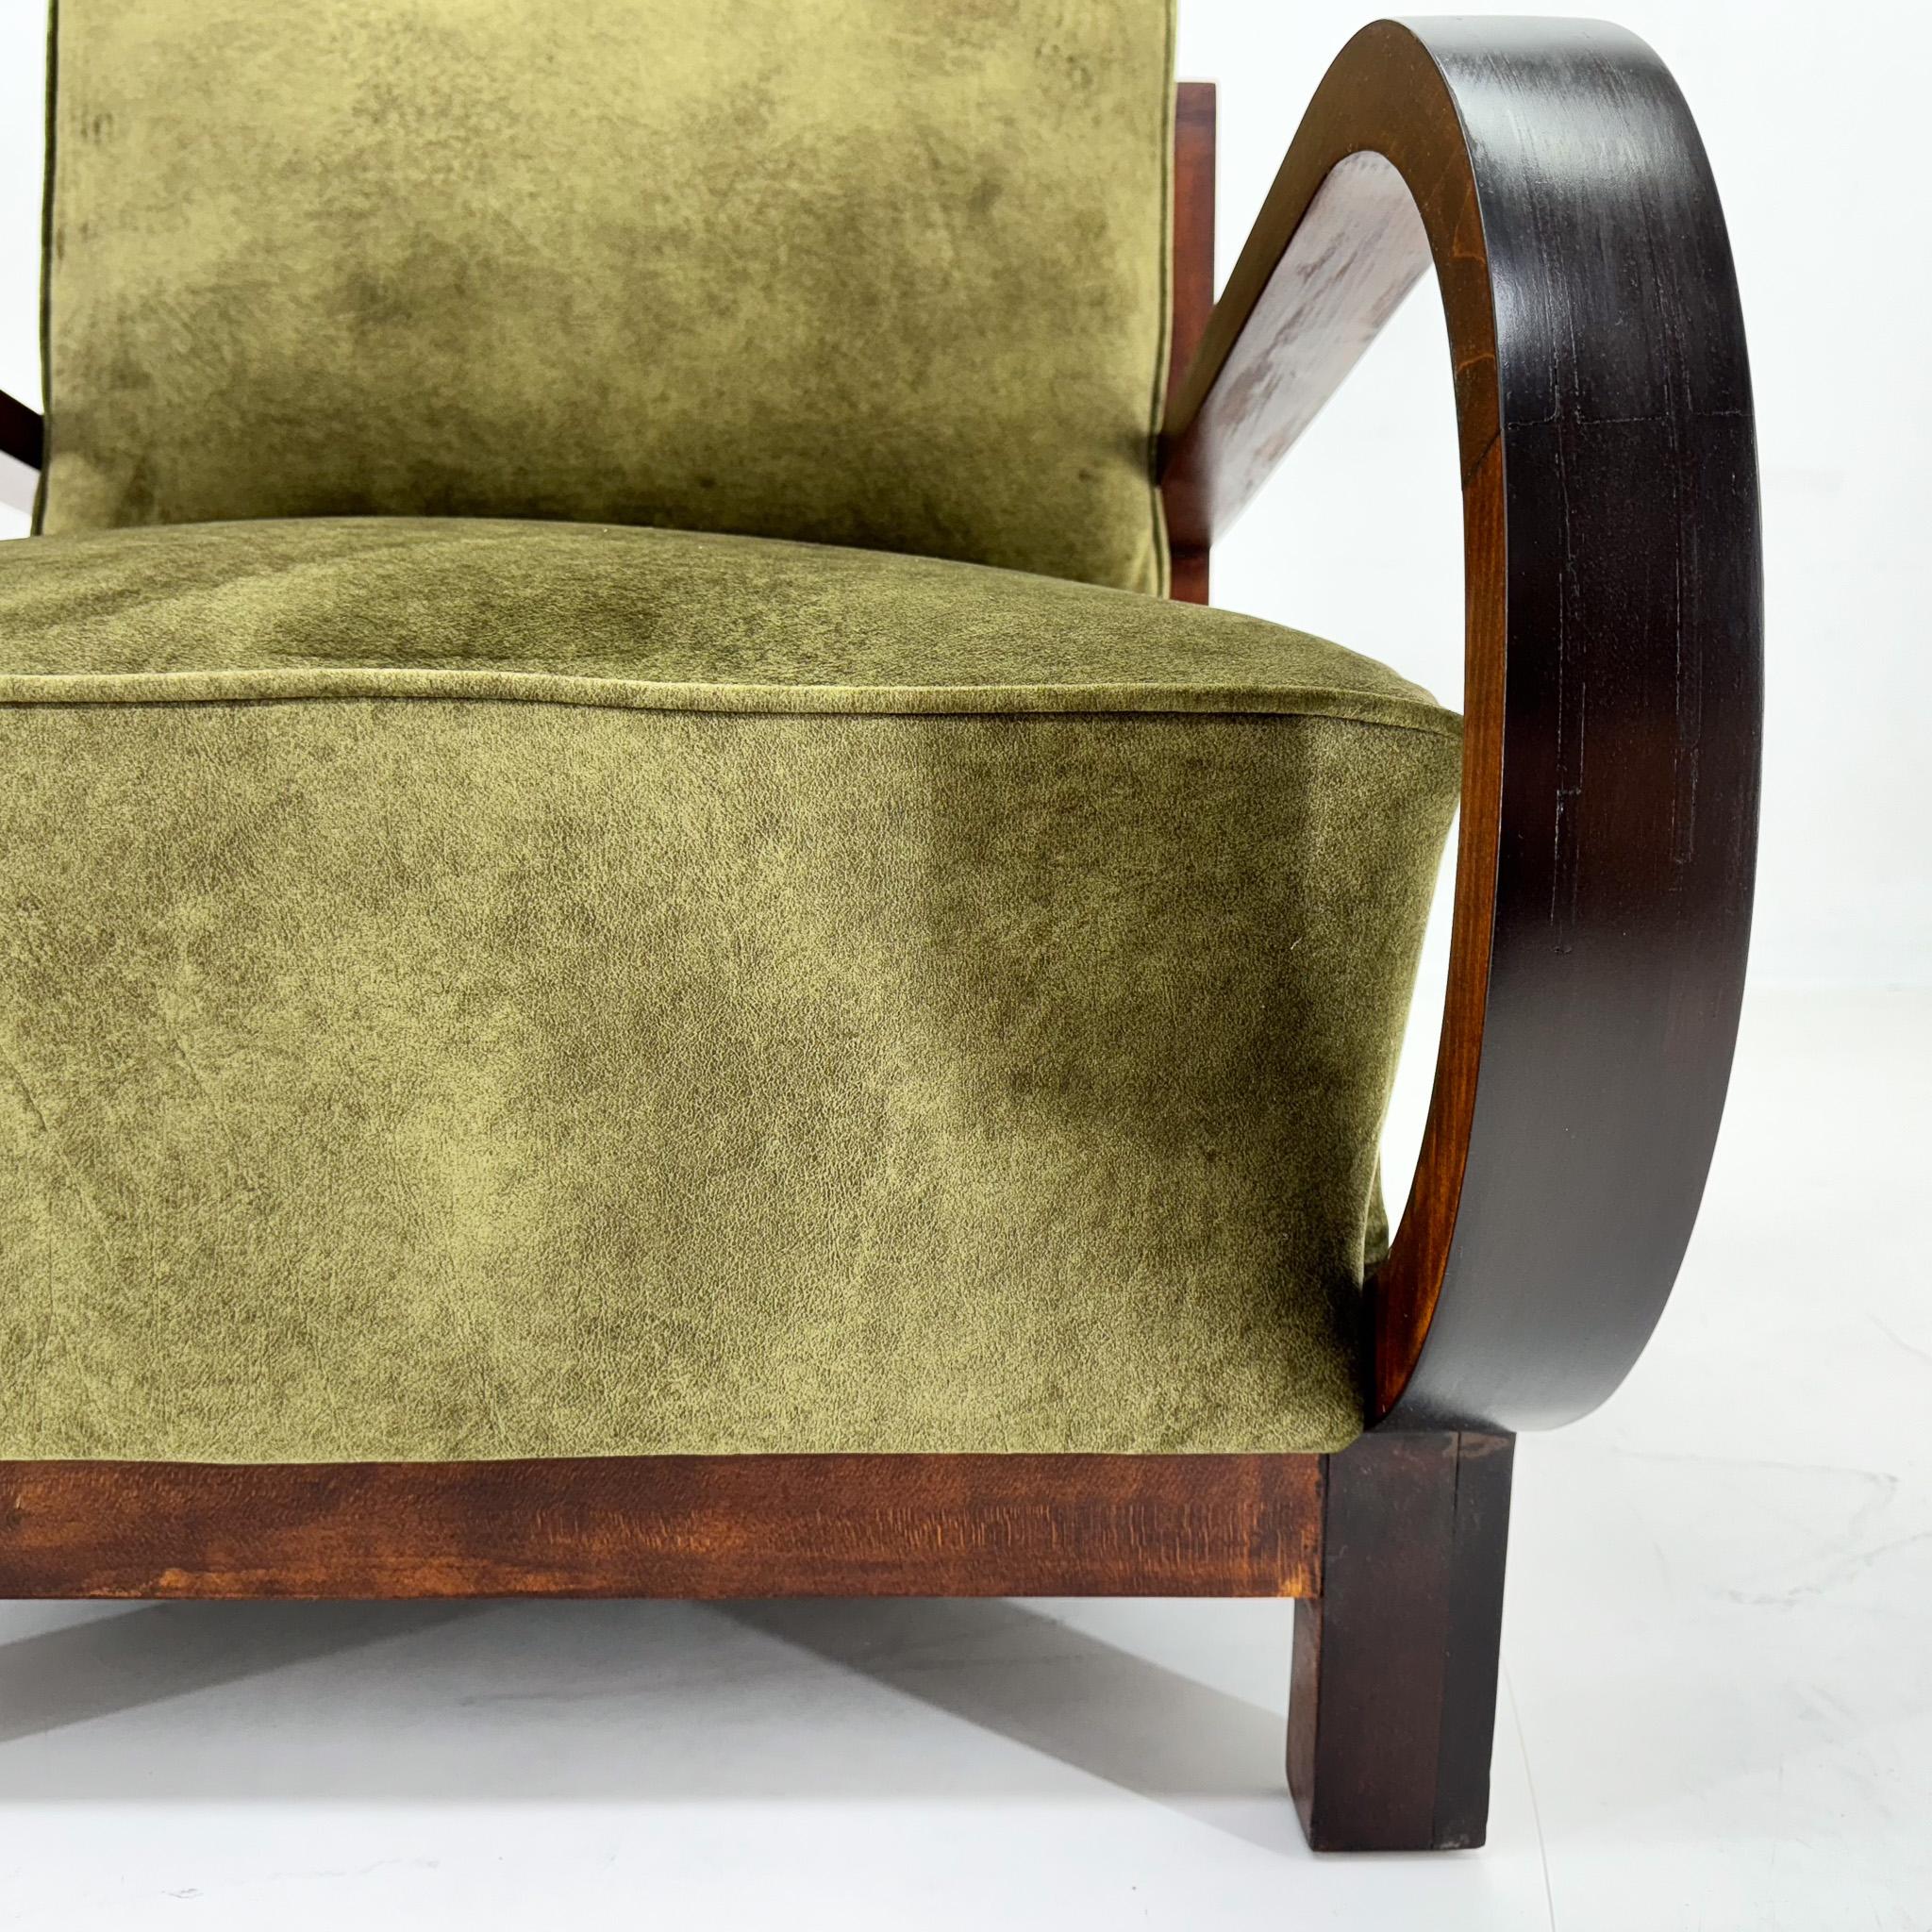 Pair of Art Deco Beech Wood Armchairs, 1930's, Newly Upholstered For Sale 11